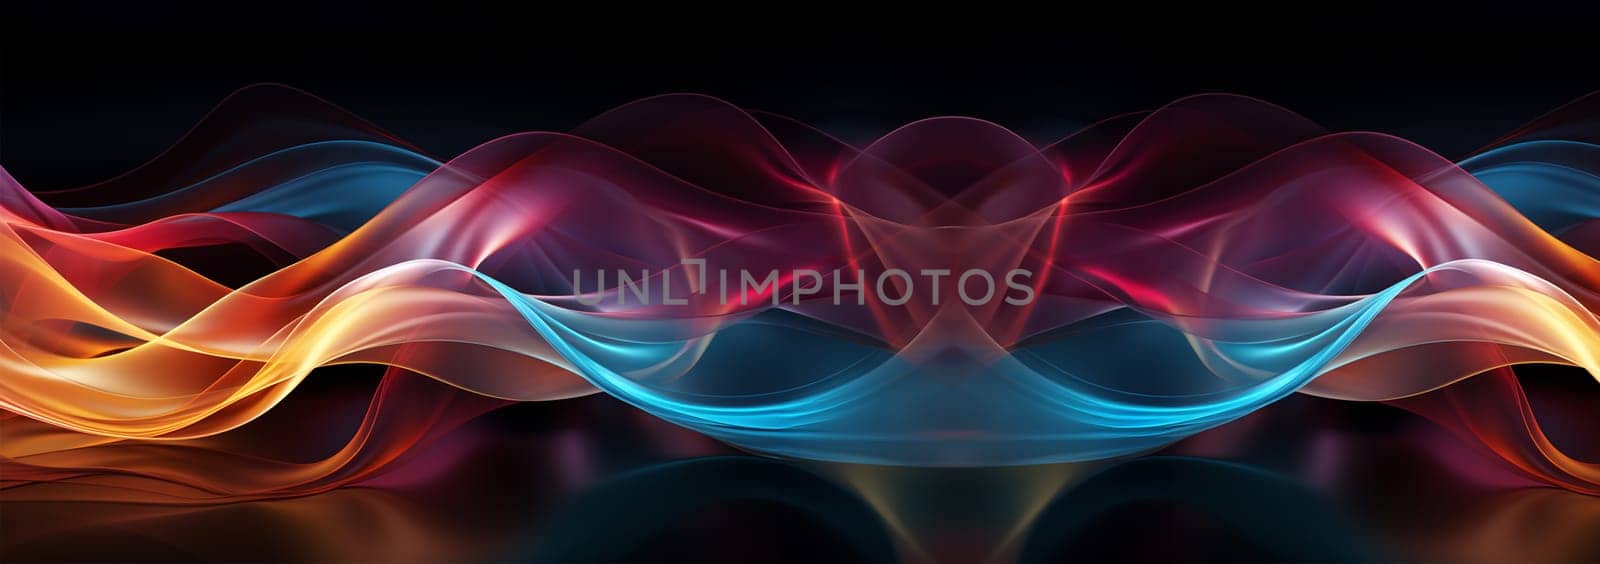 Banner Abstract 3d render. Multicolored waves. Holographic shape in motion. Iridescent gradient digital art for banner background, wallpaper. Transparent glossy design element flying in seascape. Black background Various neon colors by Annebel146